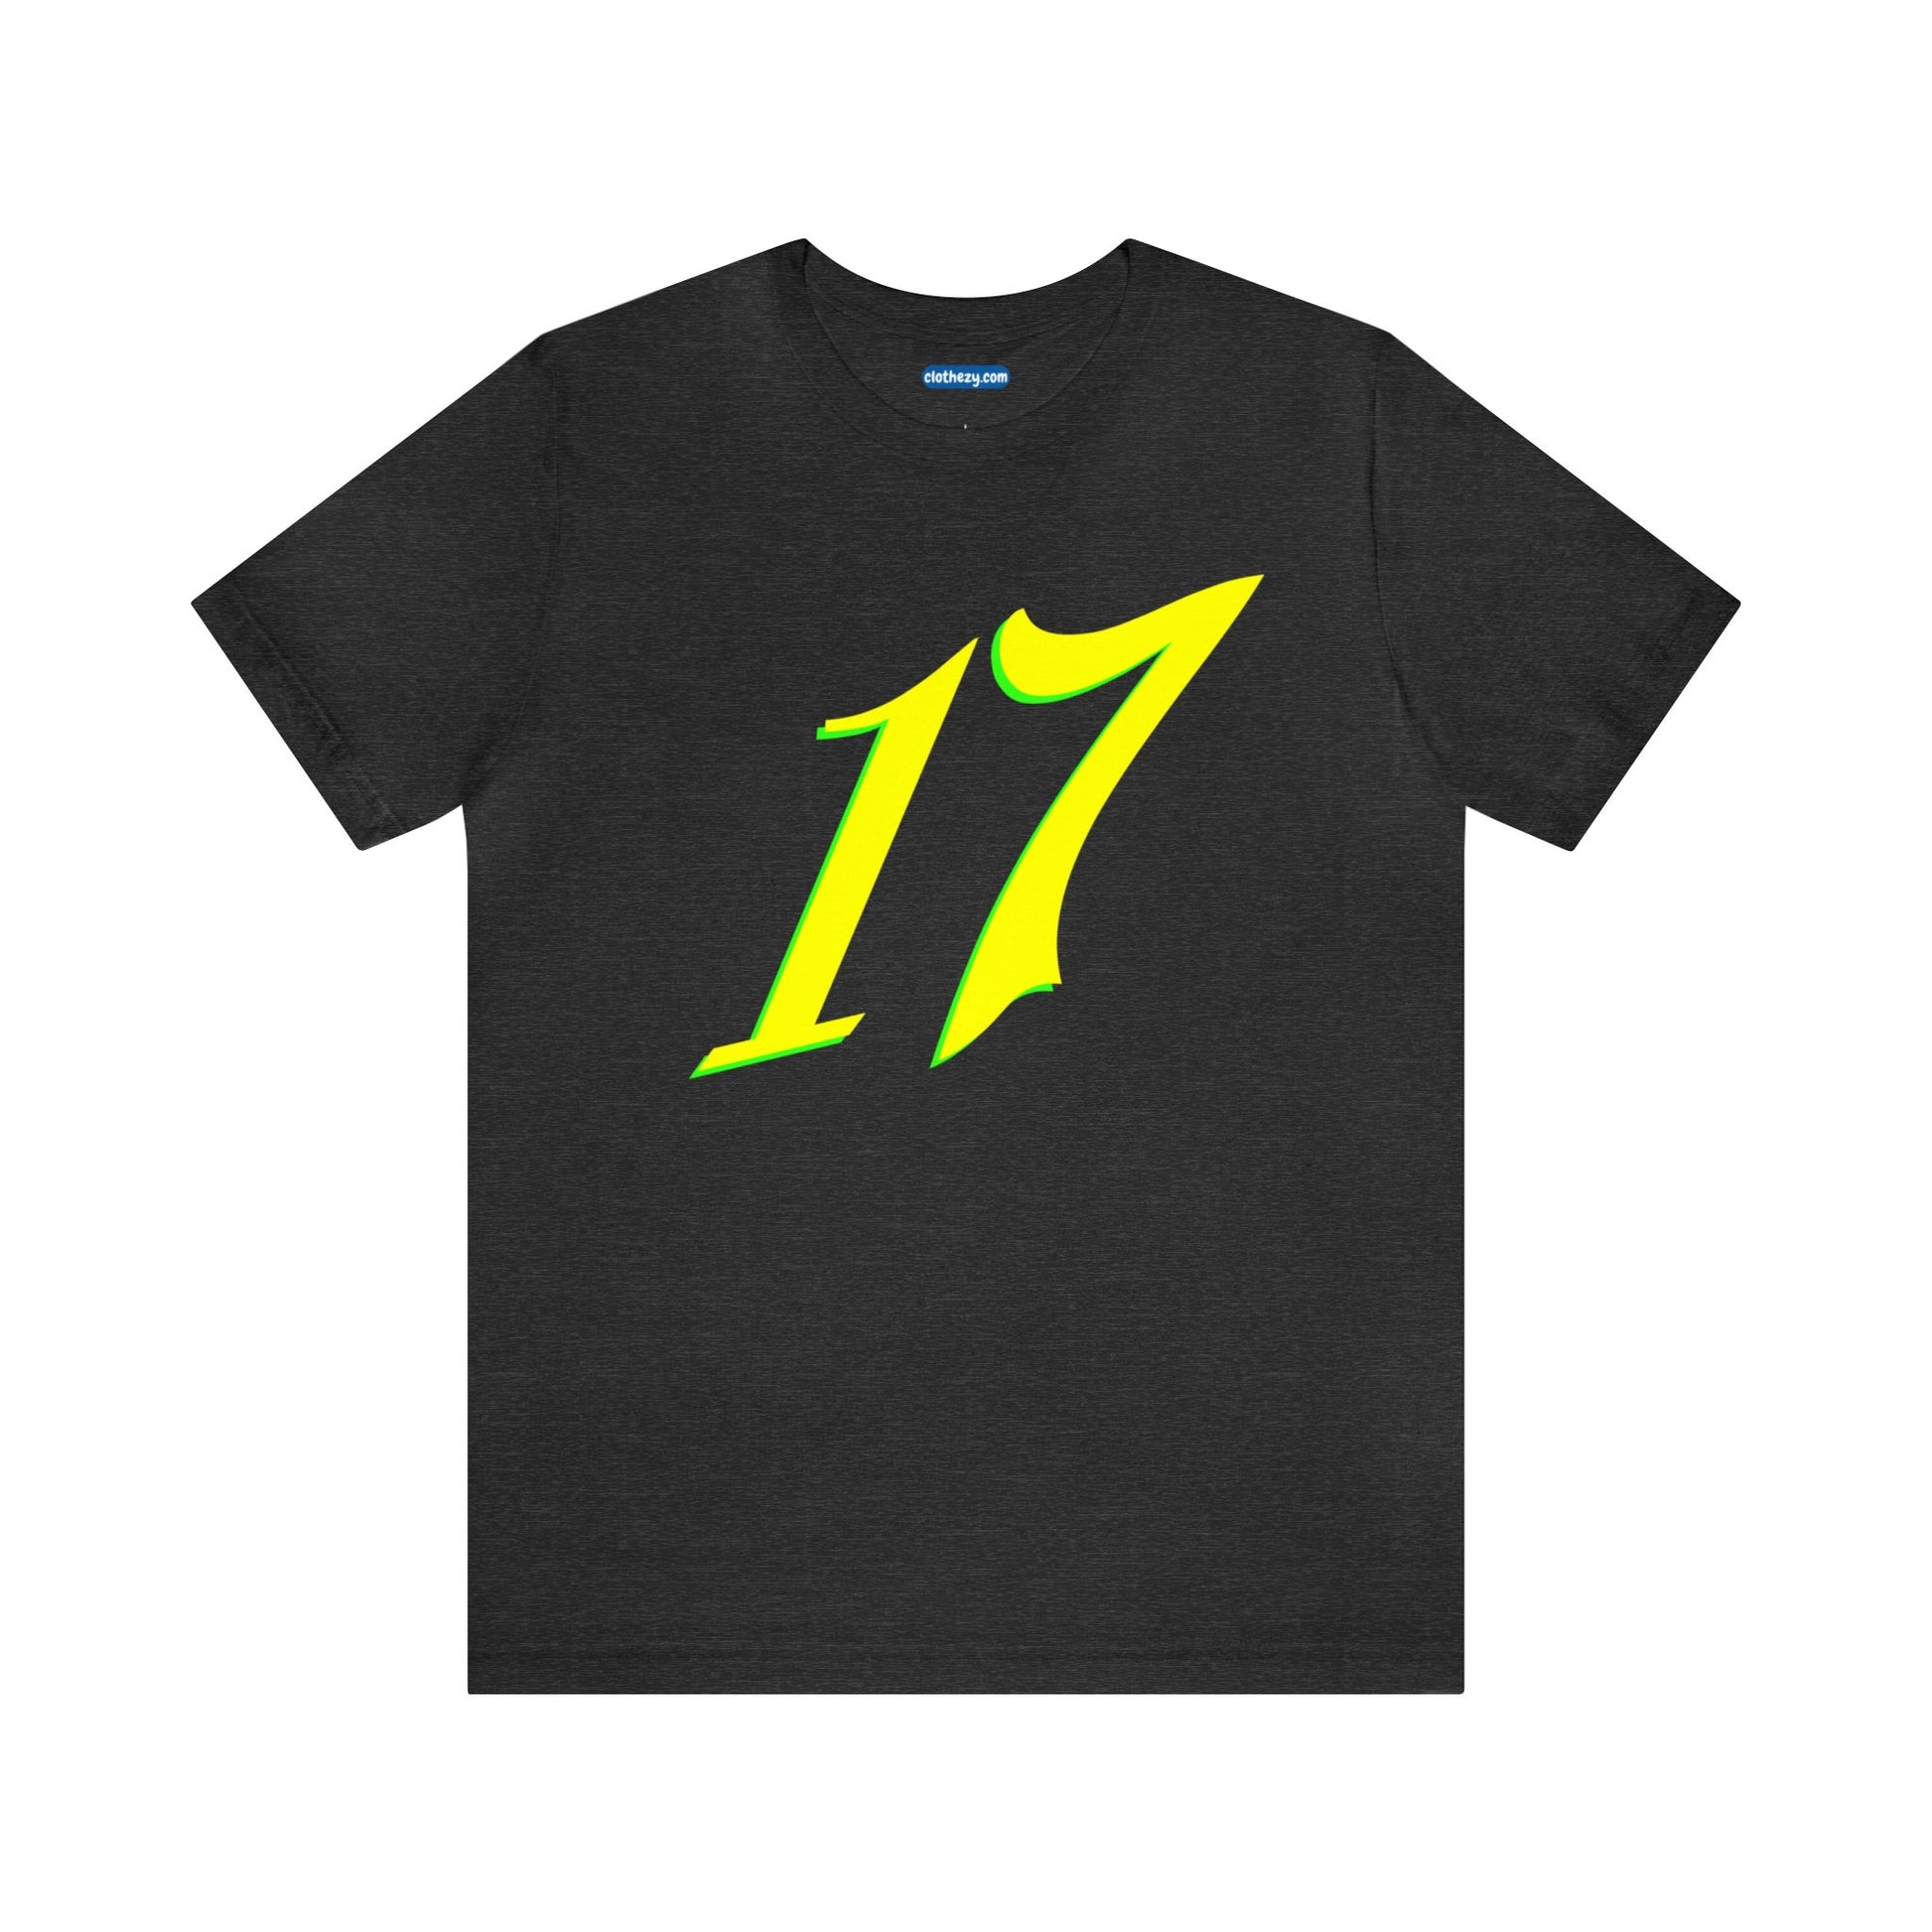 Number 17 Design - Soft Cotton Tee for birthdays and celebrations, Gift for friends and family, Multiple Options by clothezy.com in Gold Size Small - Buy Now